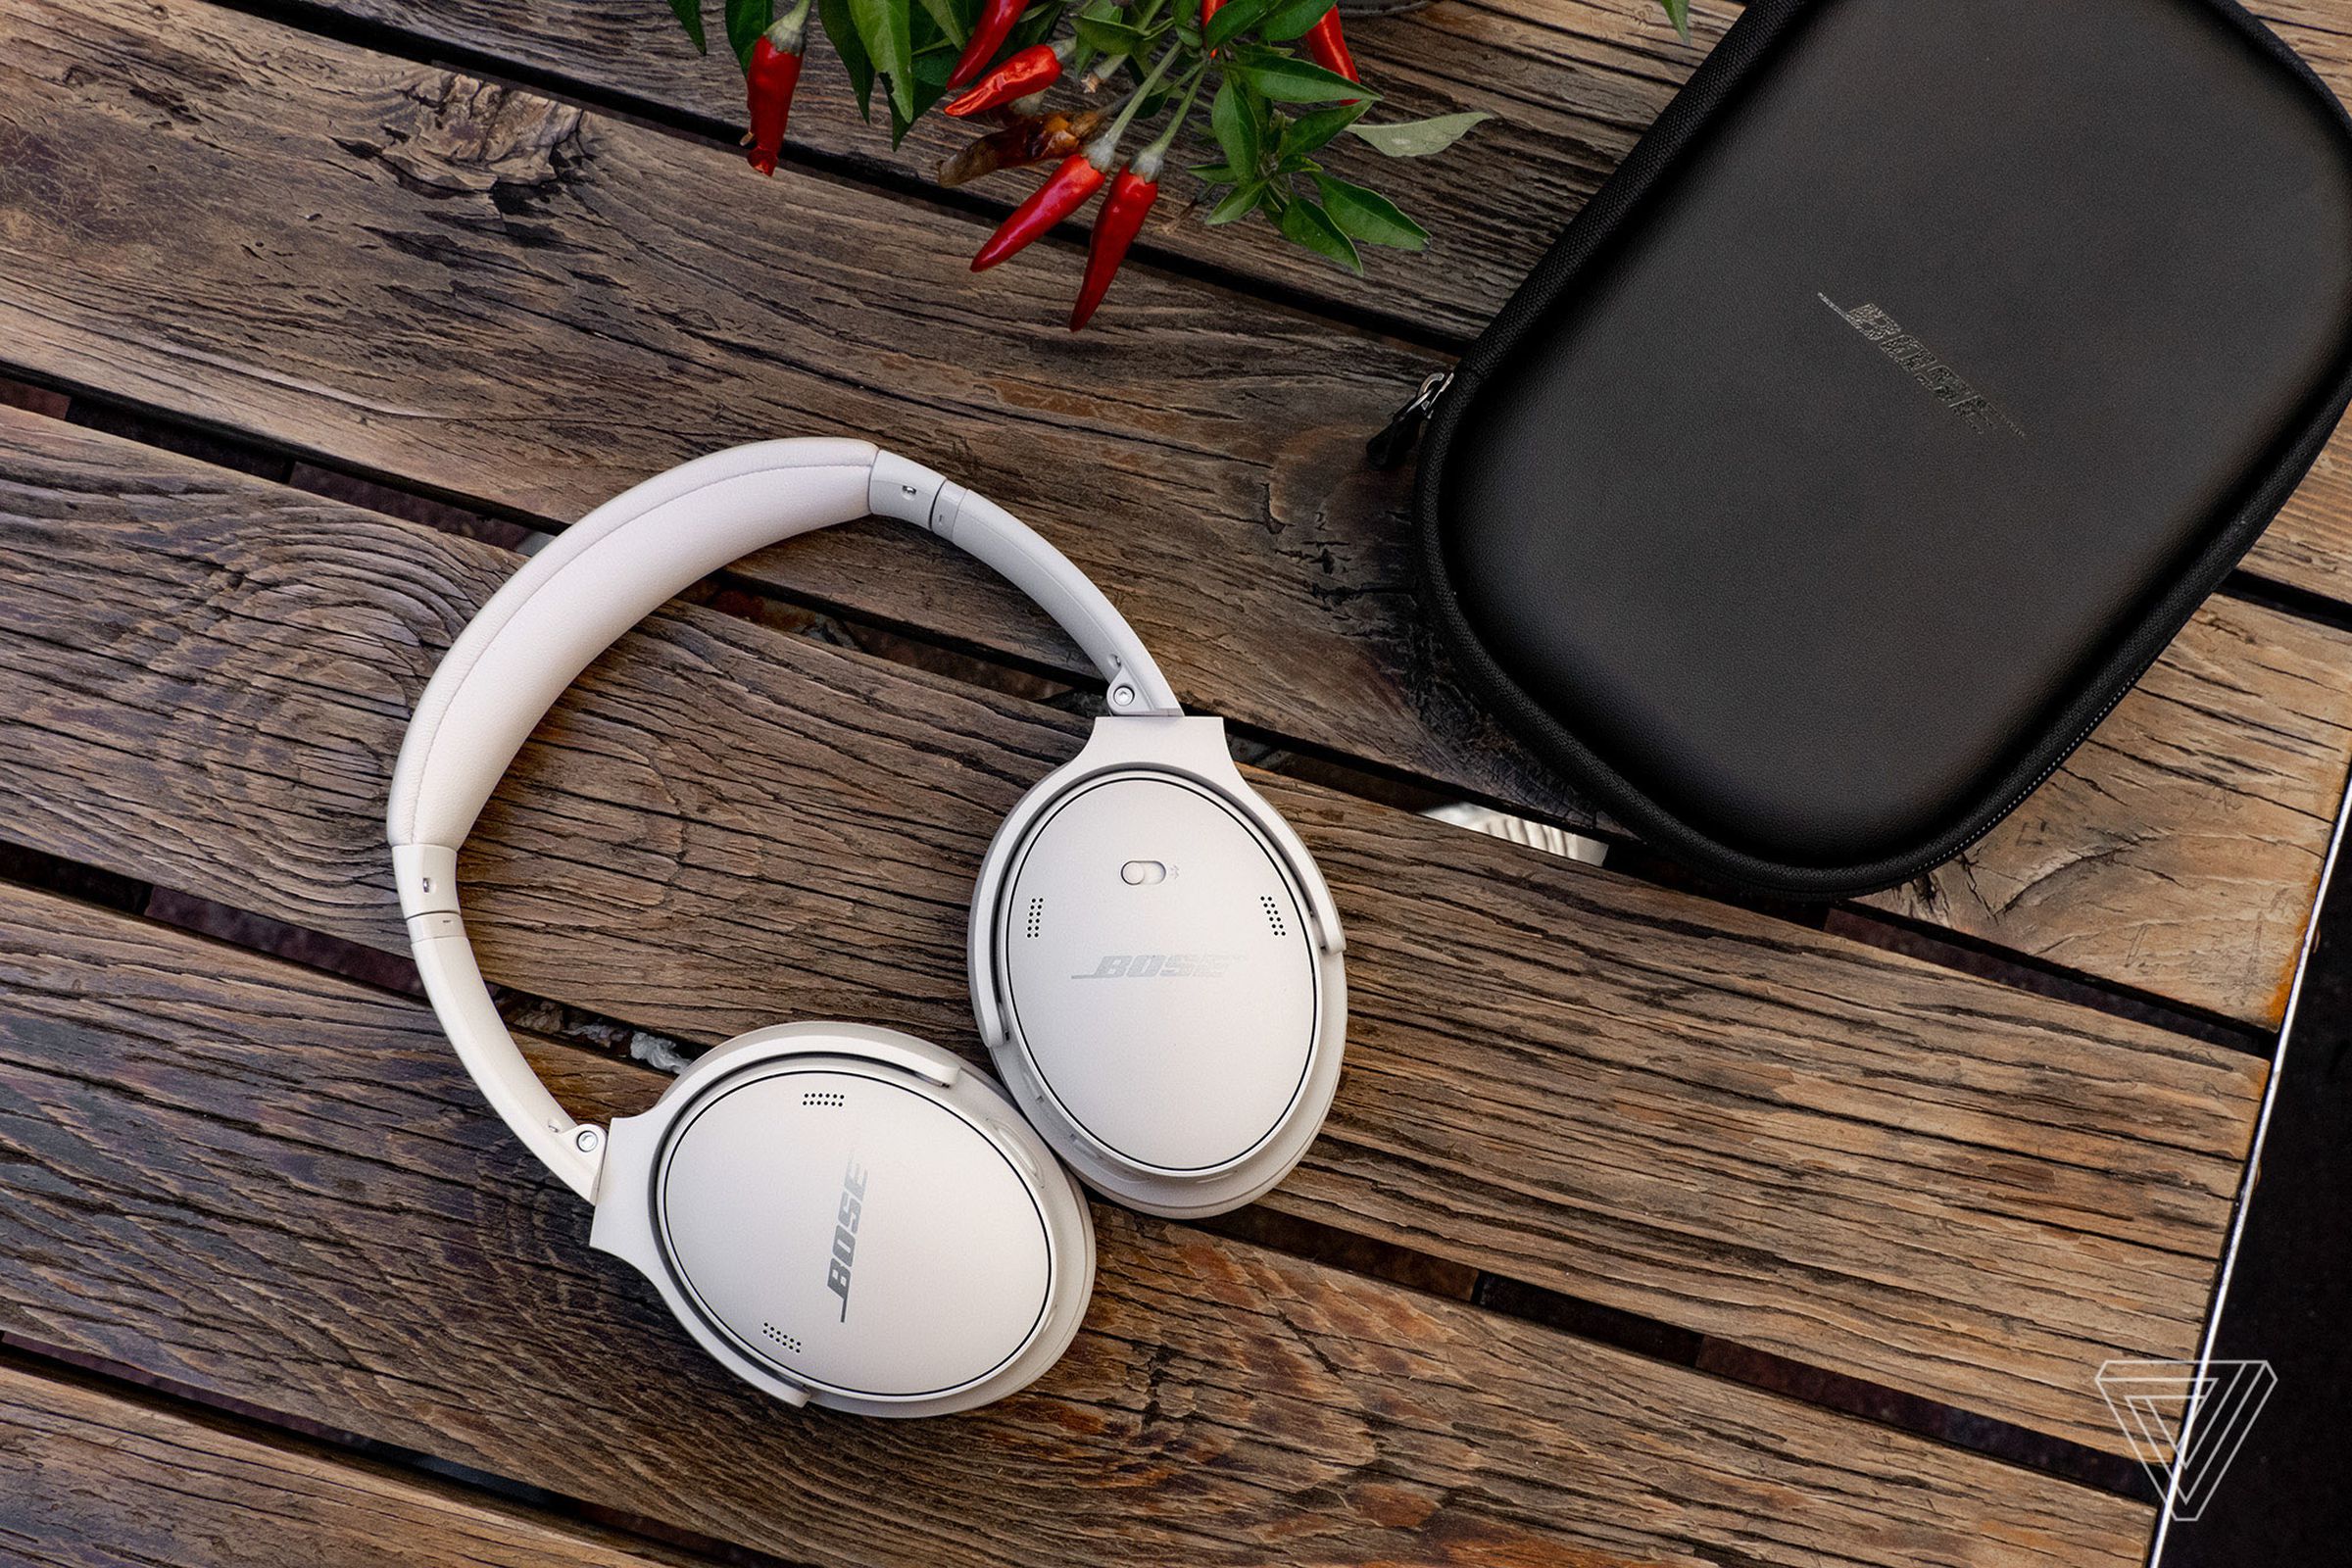 The white version of the Bose QuietComfort 45 headphones on a wood picnic table with their black protective zipper case beside them.